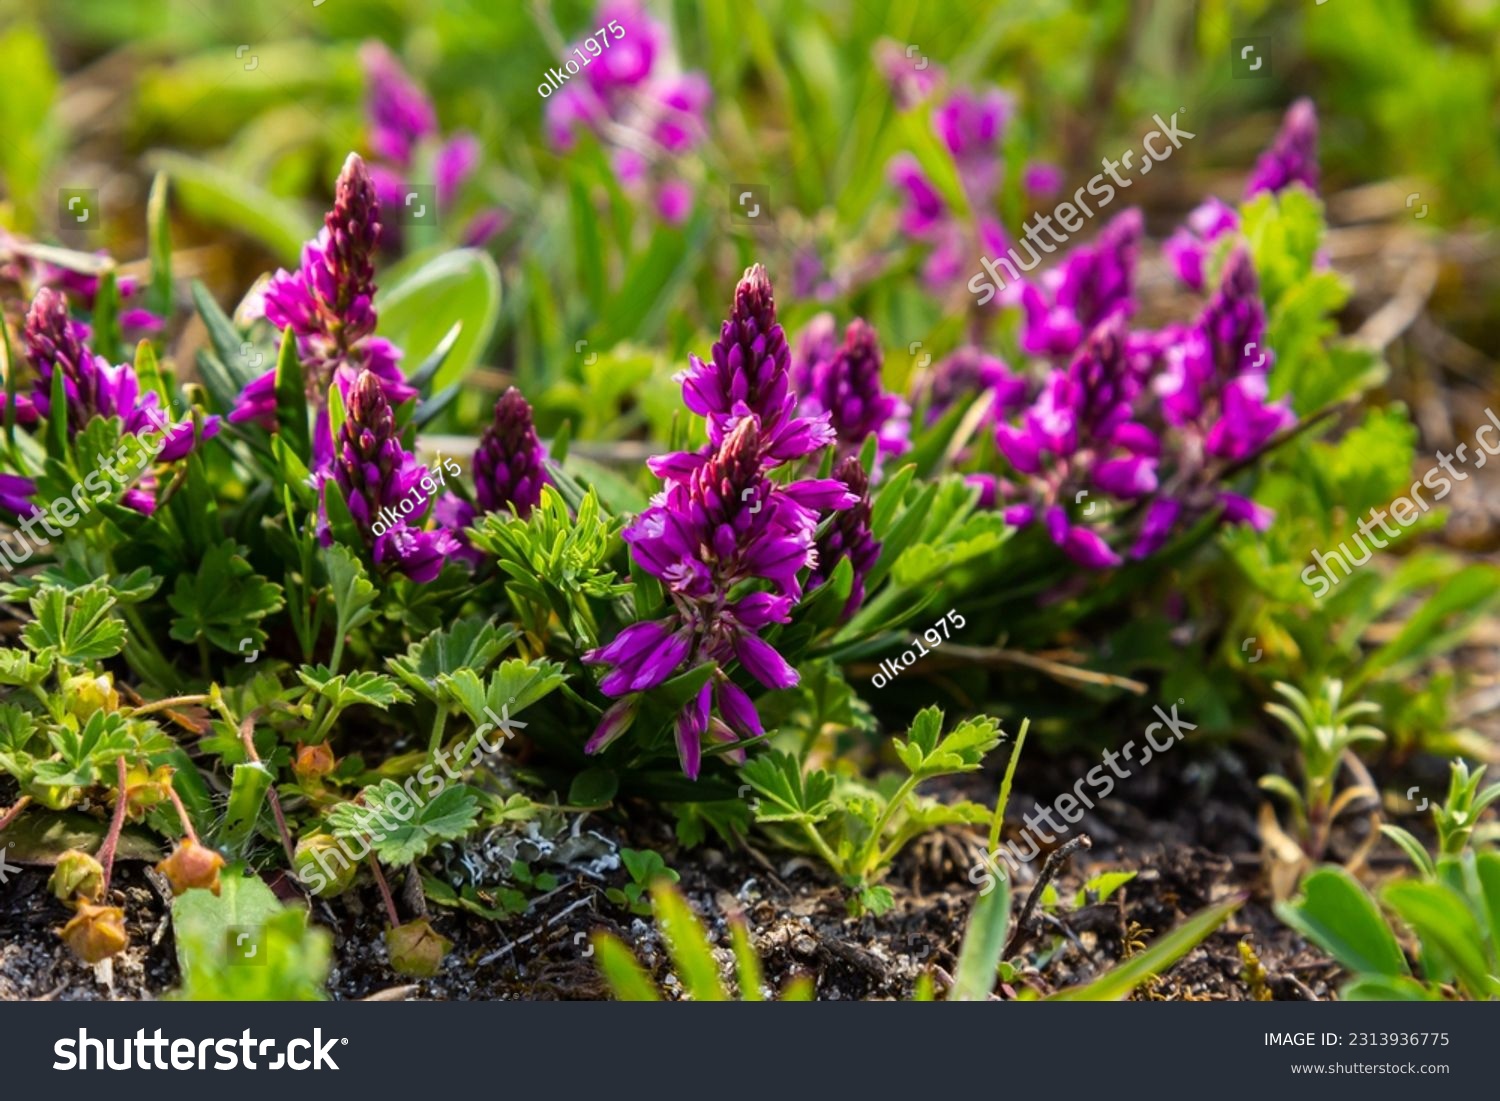 Polygala vulgaris, known as the common milkwort, is a herbaceous perennial plant of the family Polygalaceae. Polygala vulgaris subsp. oxyptera, Polygalaceae. Wild plant shot in summer. #2313936775